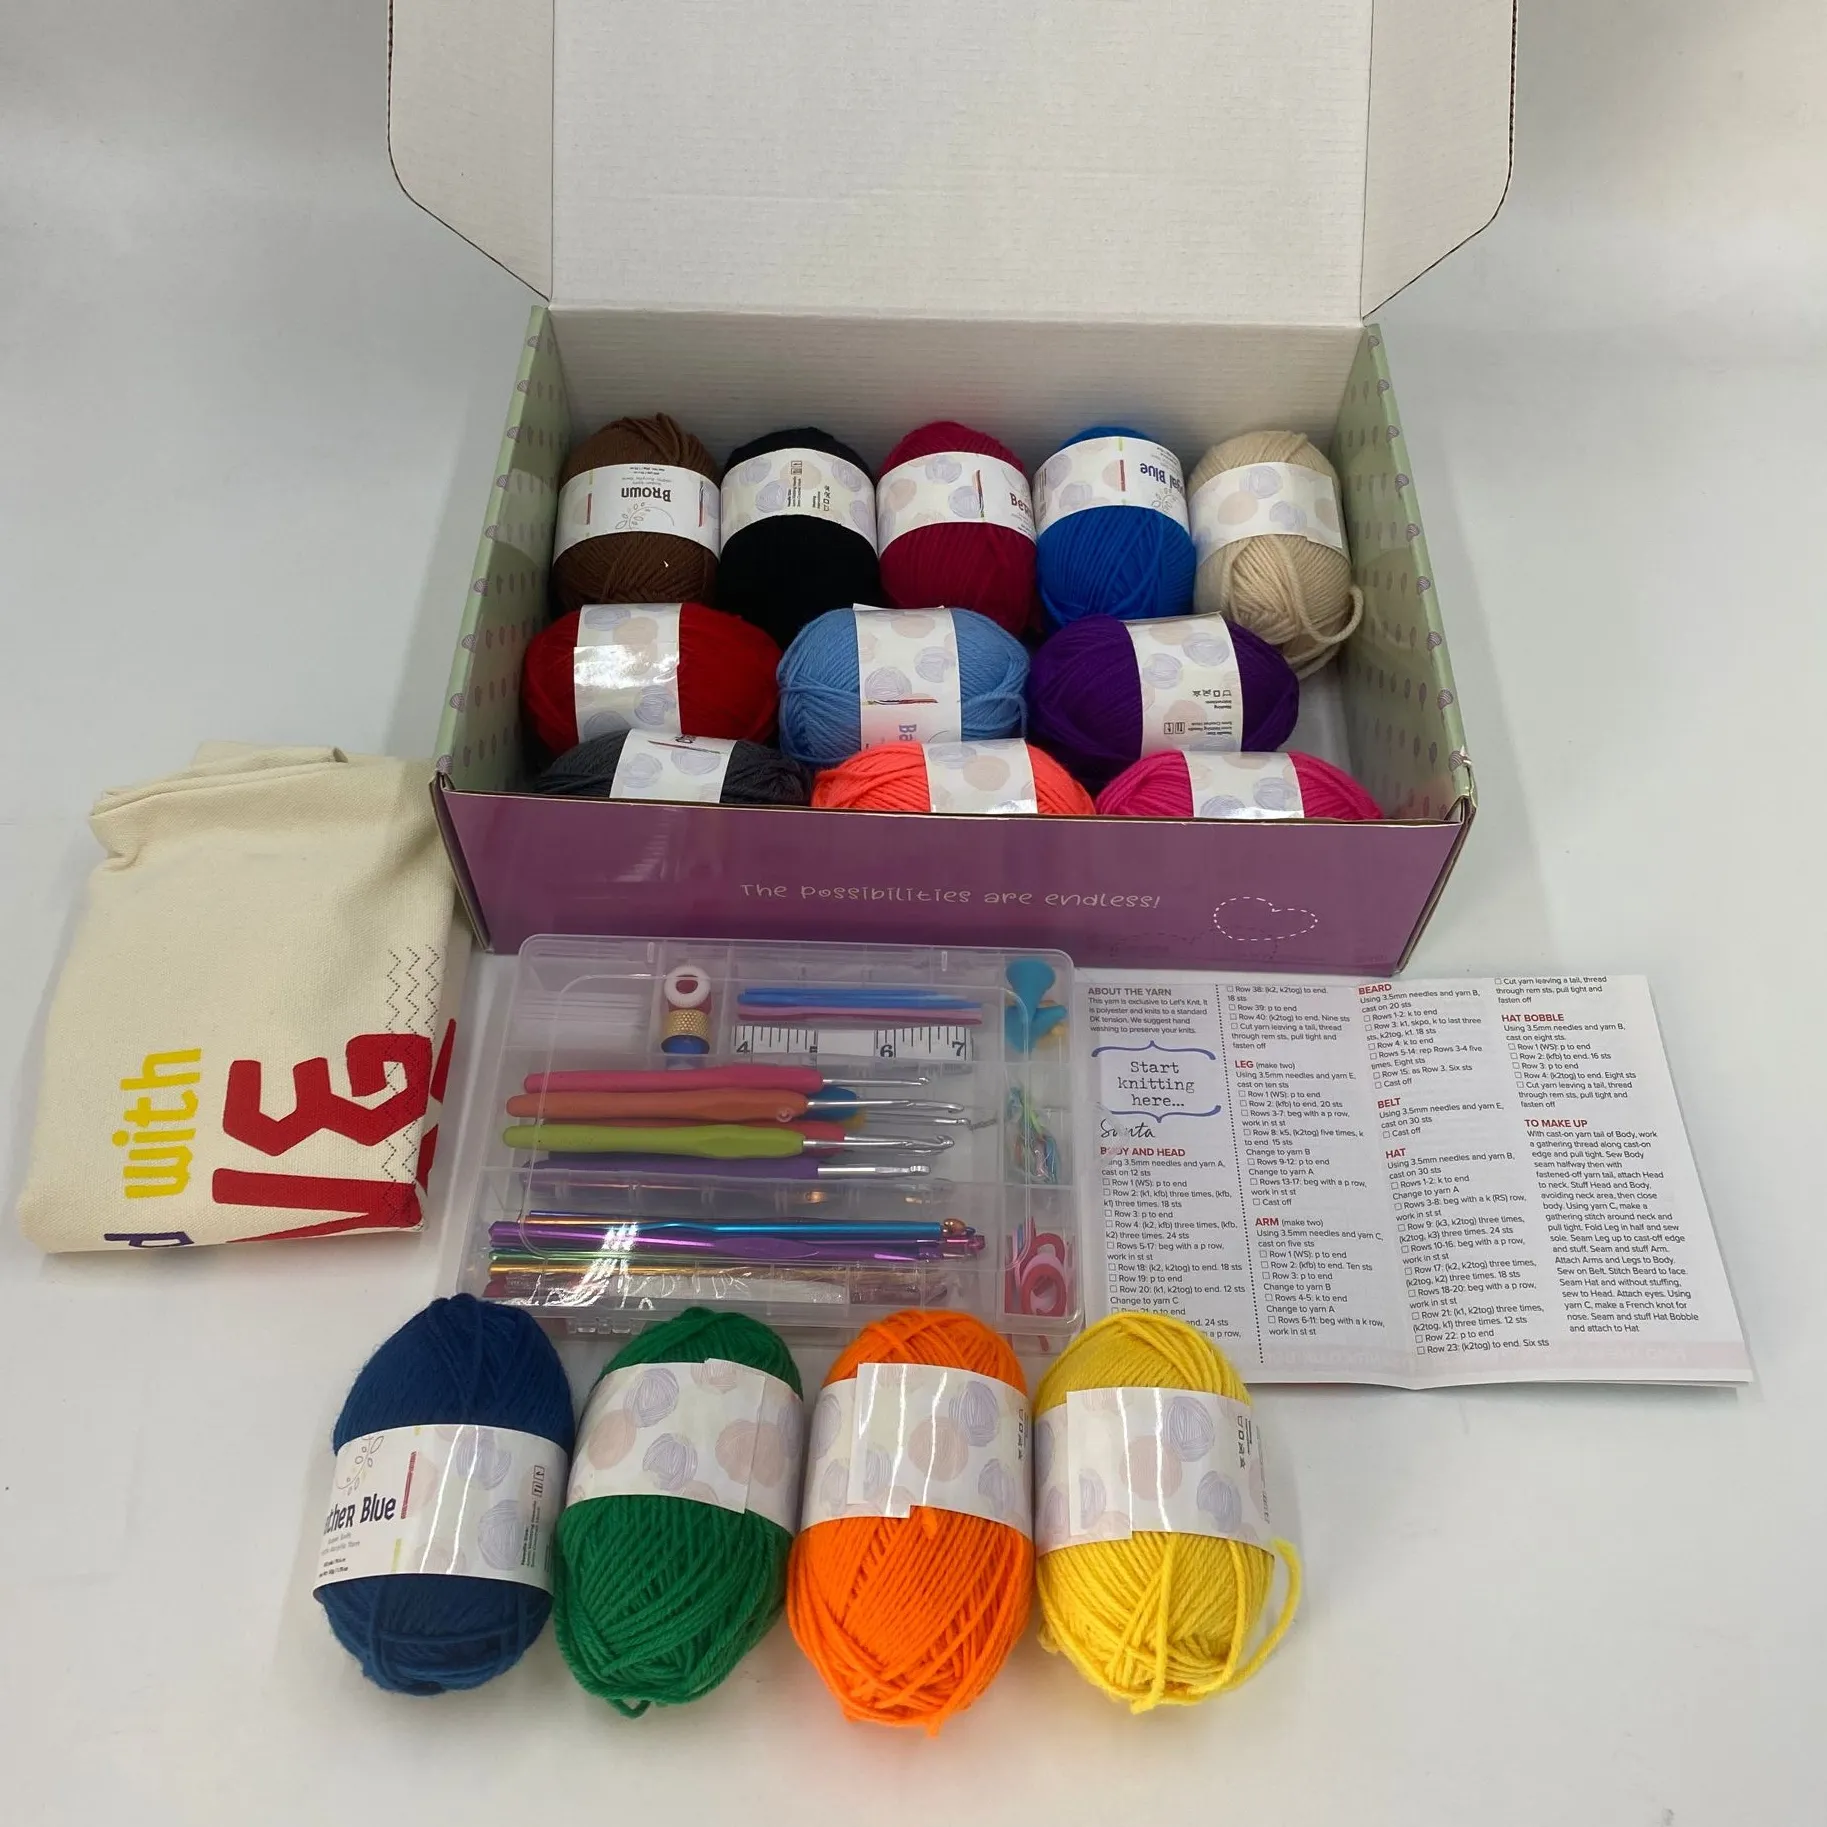 Let's Knit Together DIY Crochet Kit for Beginners with Crochet Hooks Yarn for Crocheting 74 Pieces